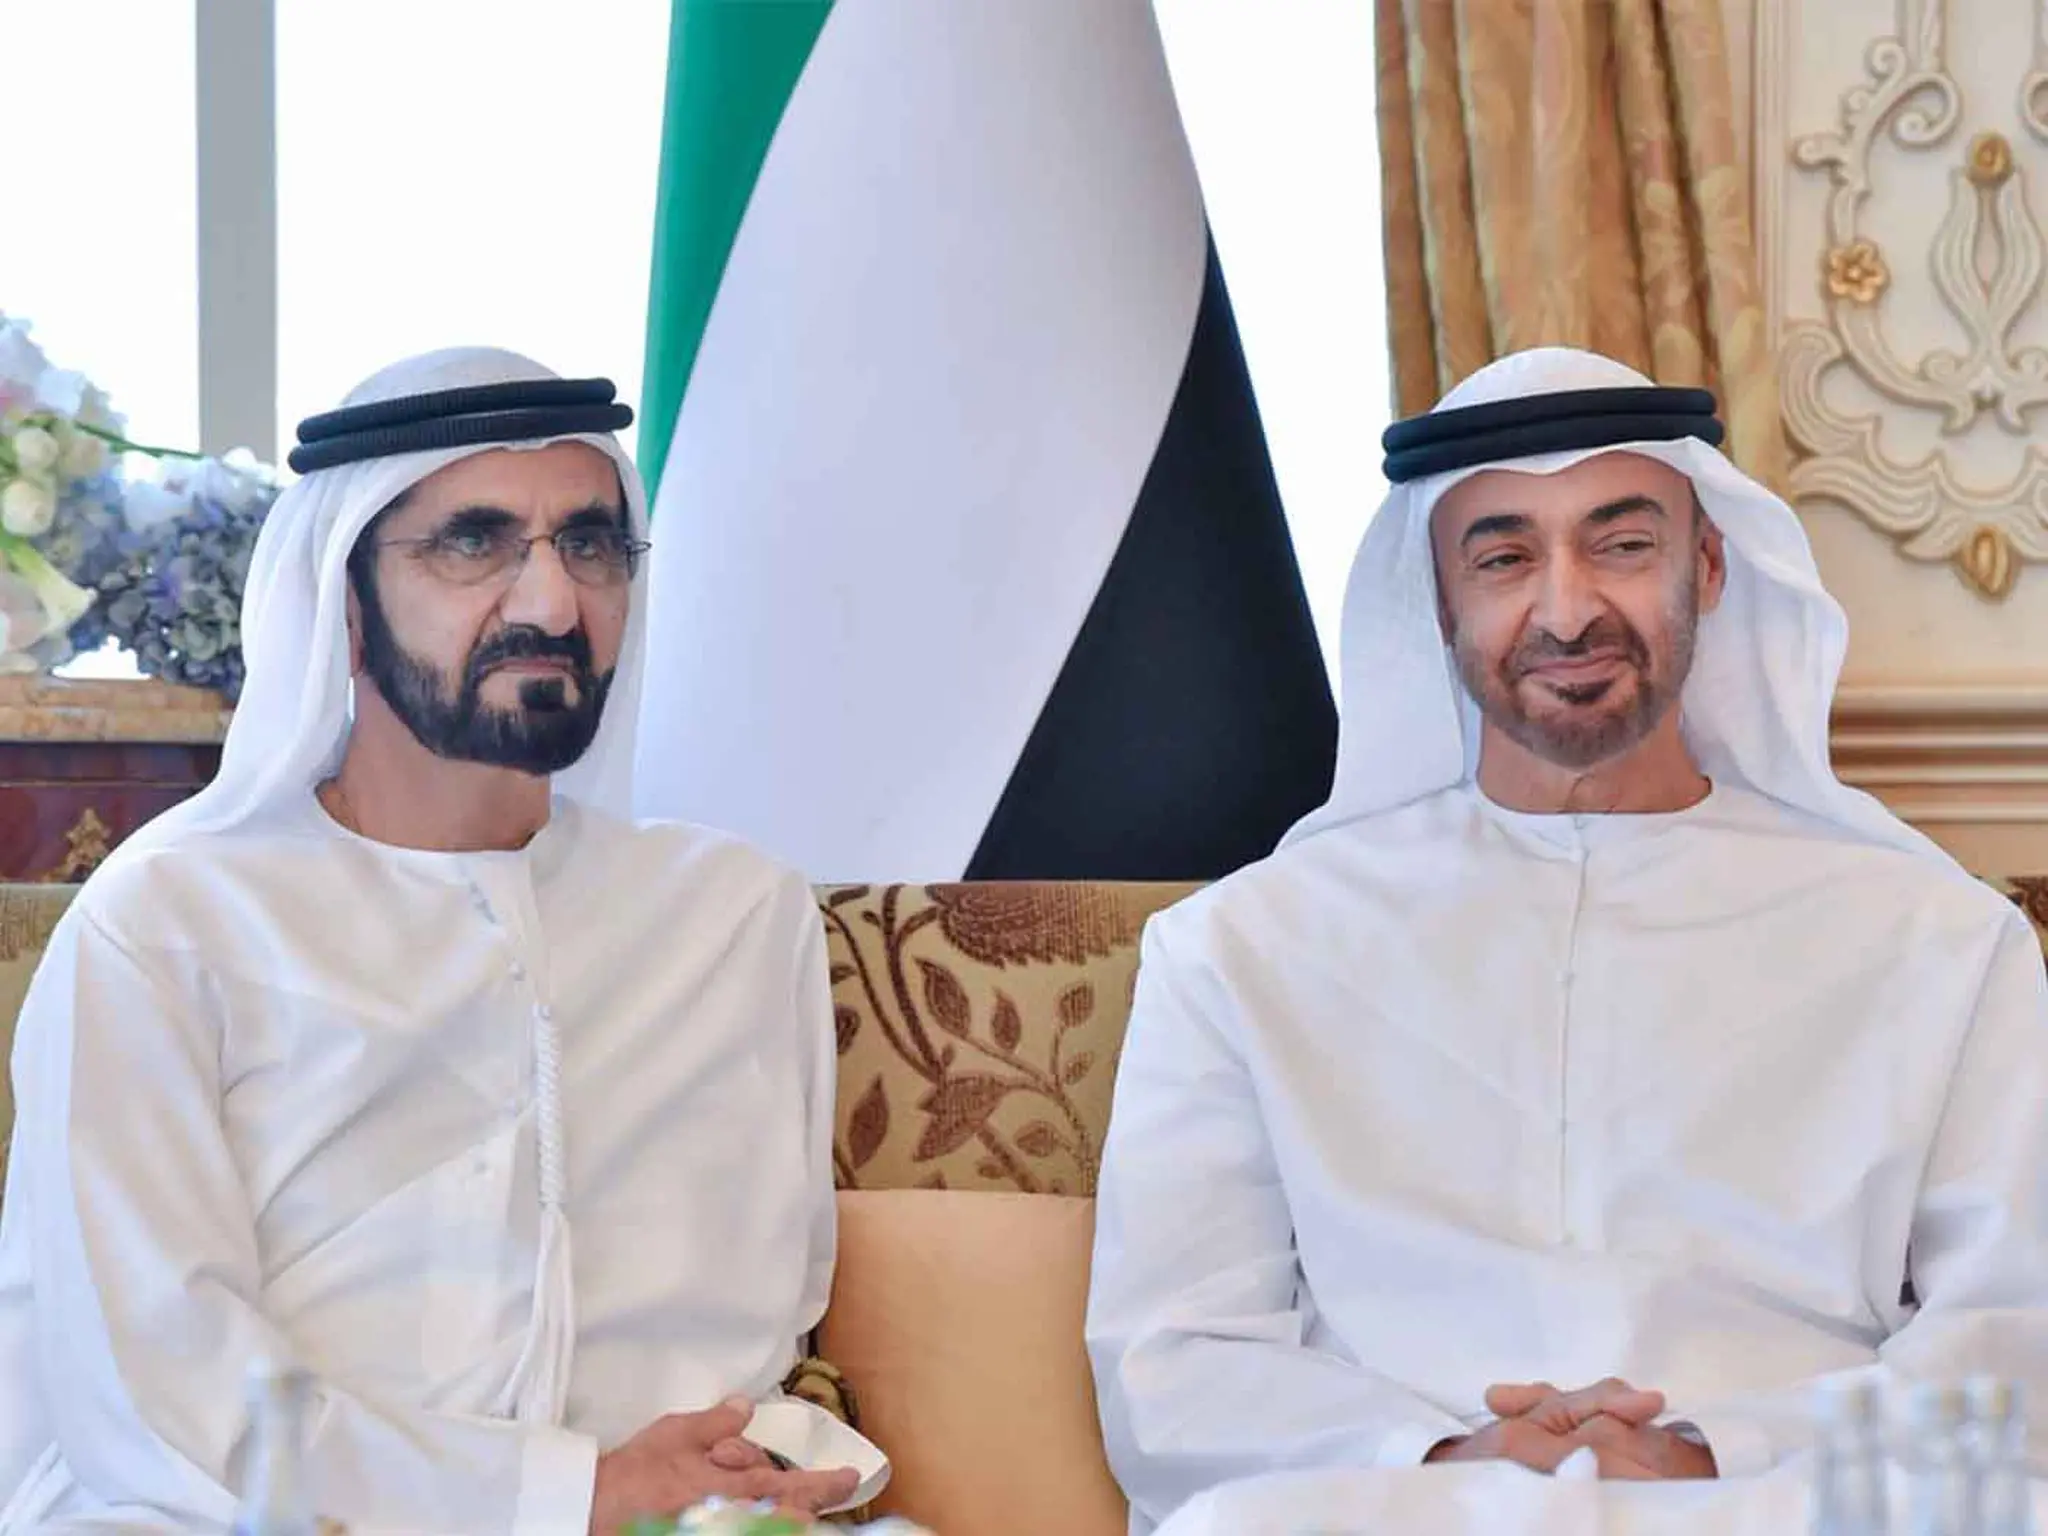 The emirates issues An urgent decision to grant golden residency to these expatriates